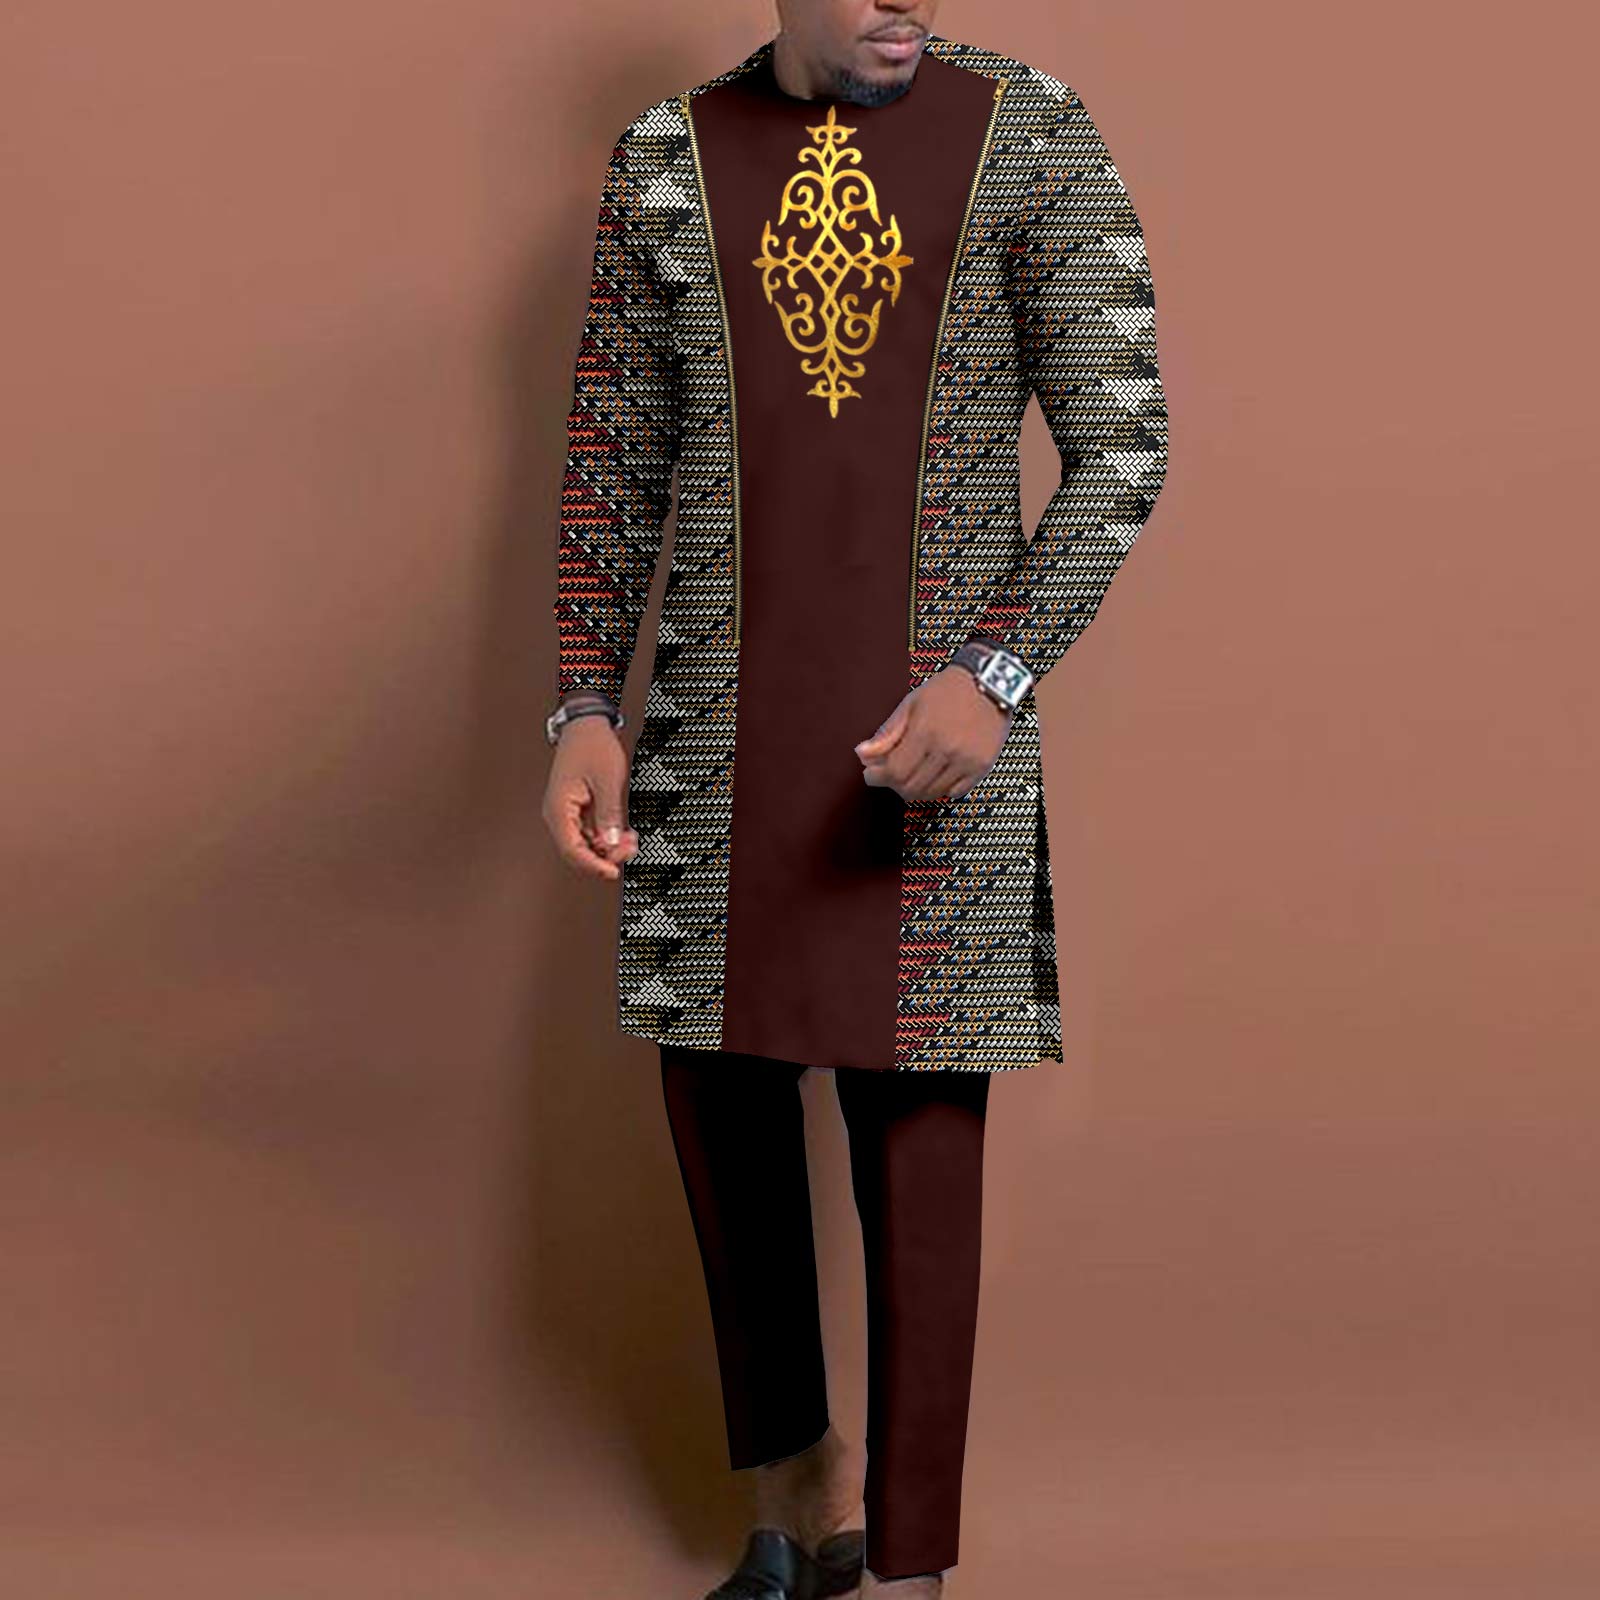 Bazin Riche African Traditional Clothing - Vibrant and Elegant Styles for Men and Women - Flexi Africa - Flexi Africa offers Free Delivery Worldwide - Vibrant African traditional clothing showcasing bold prints and intricate designs